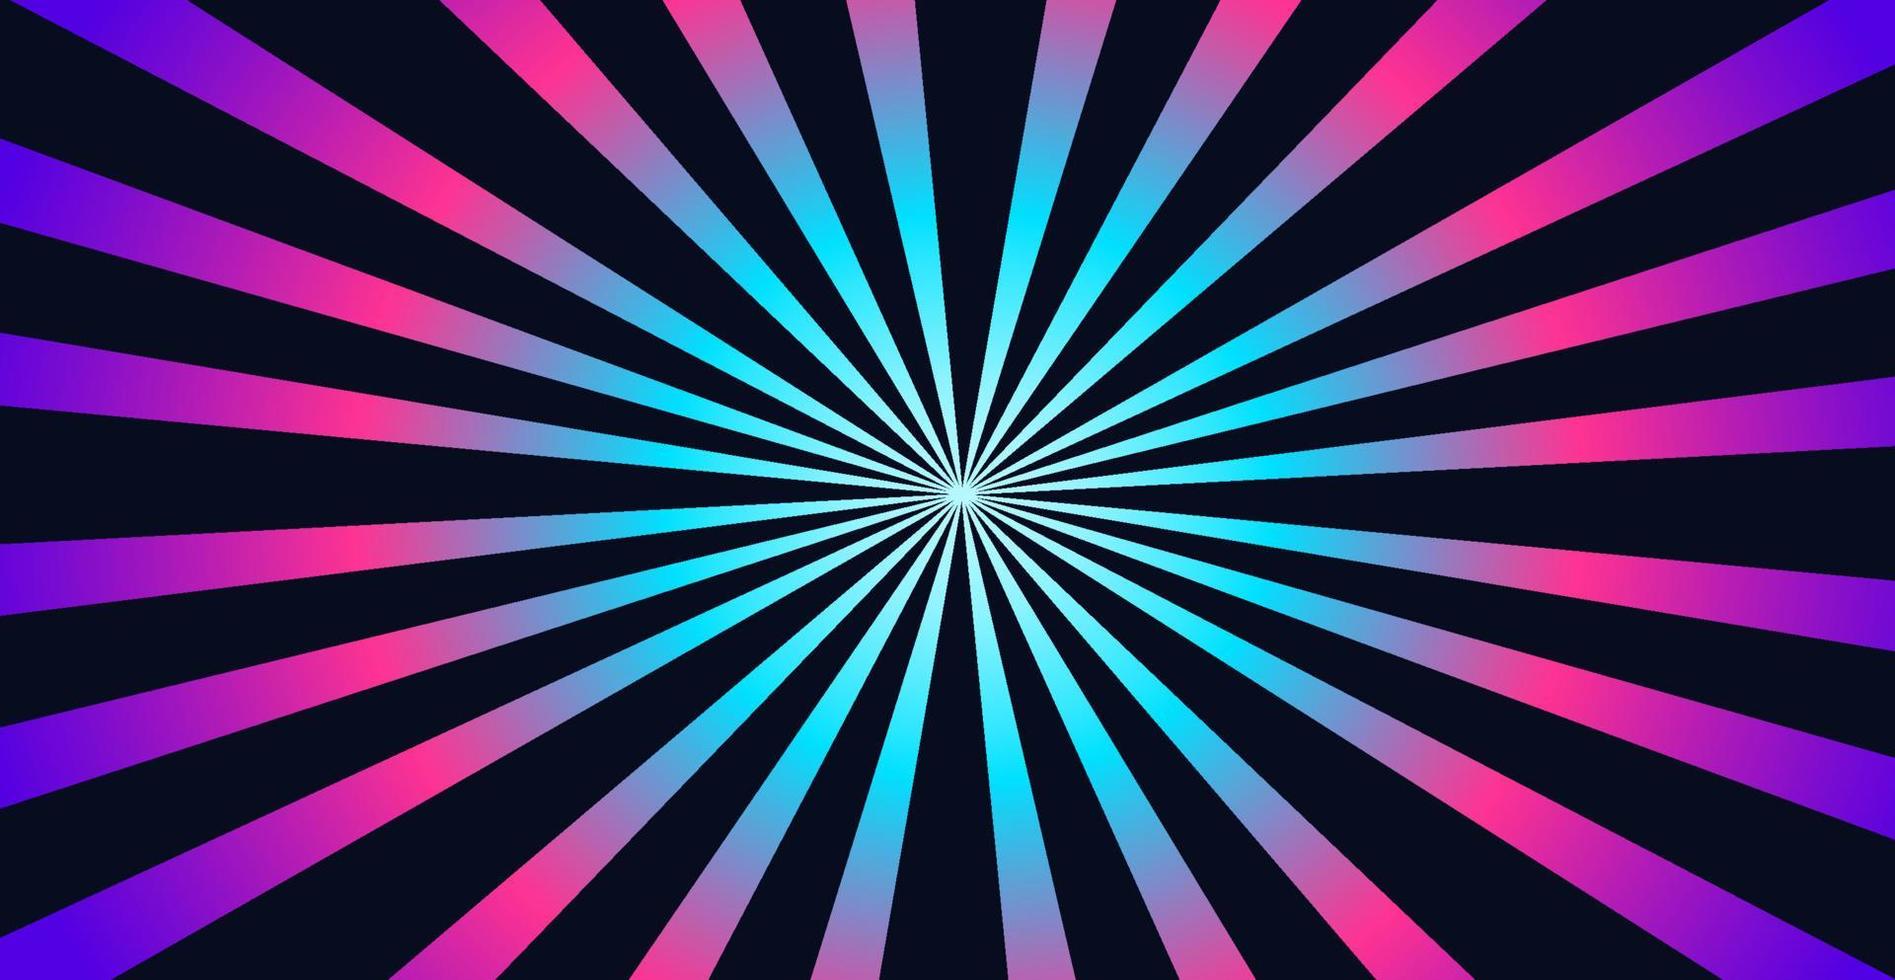 Psychedelic abstract background. Optical illusion. Hypnotic Pattern of neon rays emanating from the center. vector